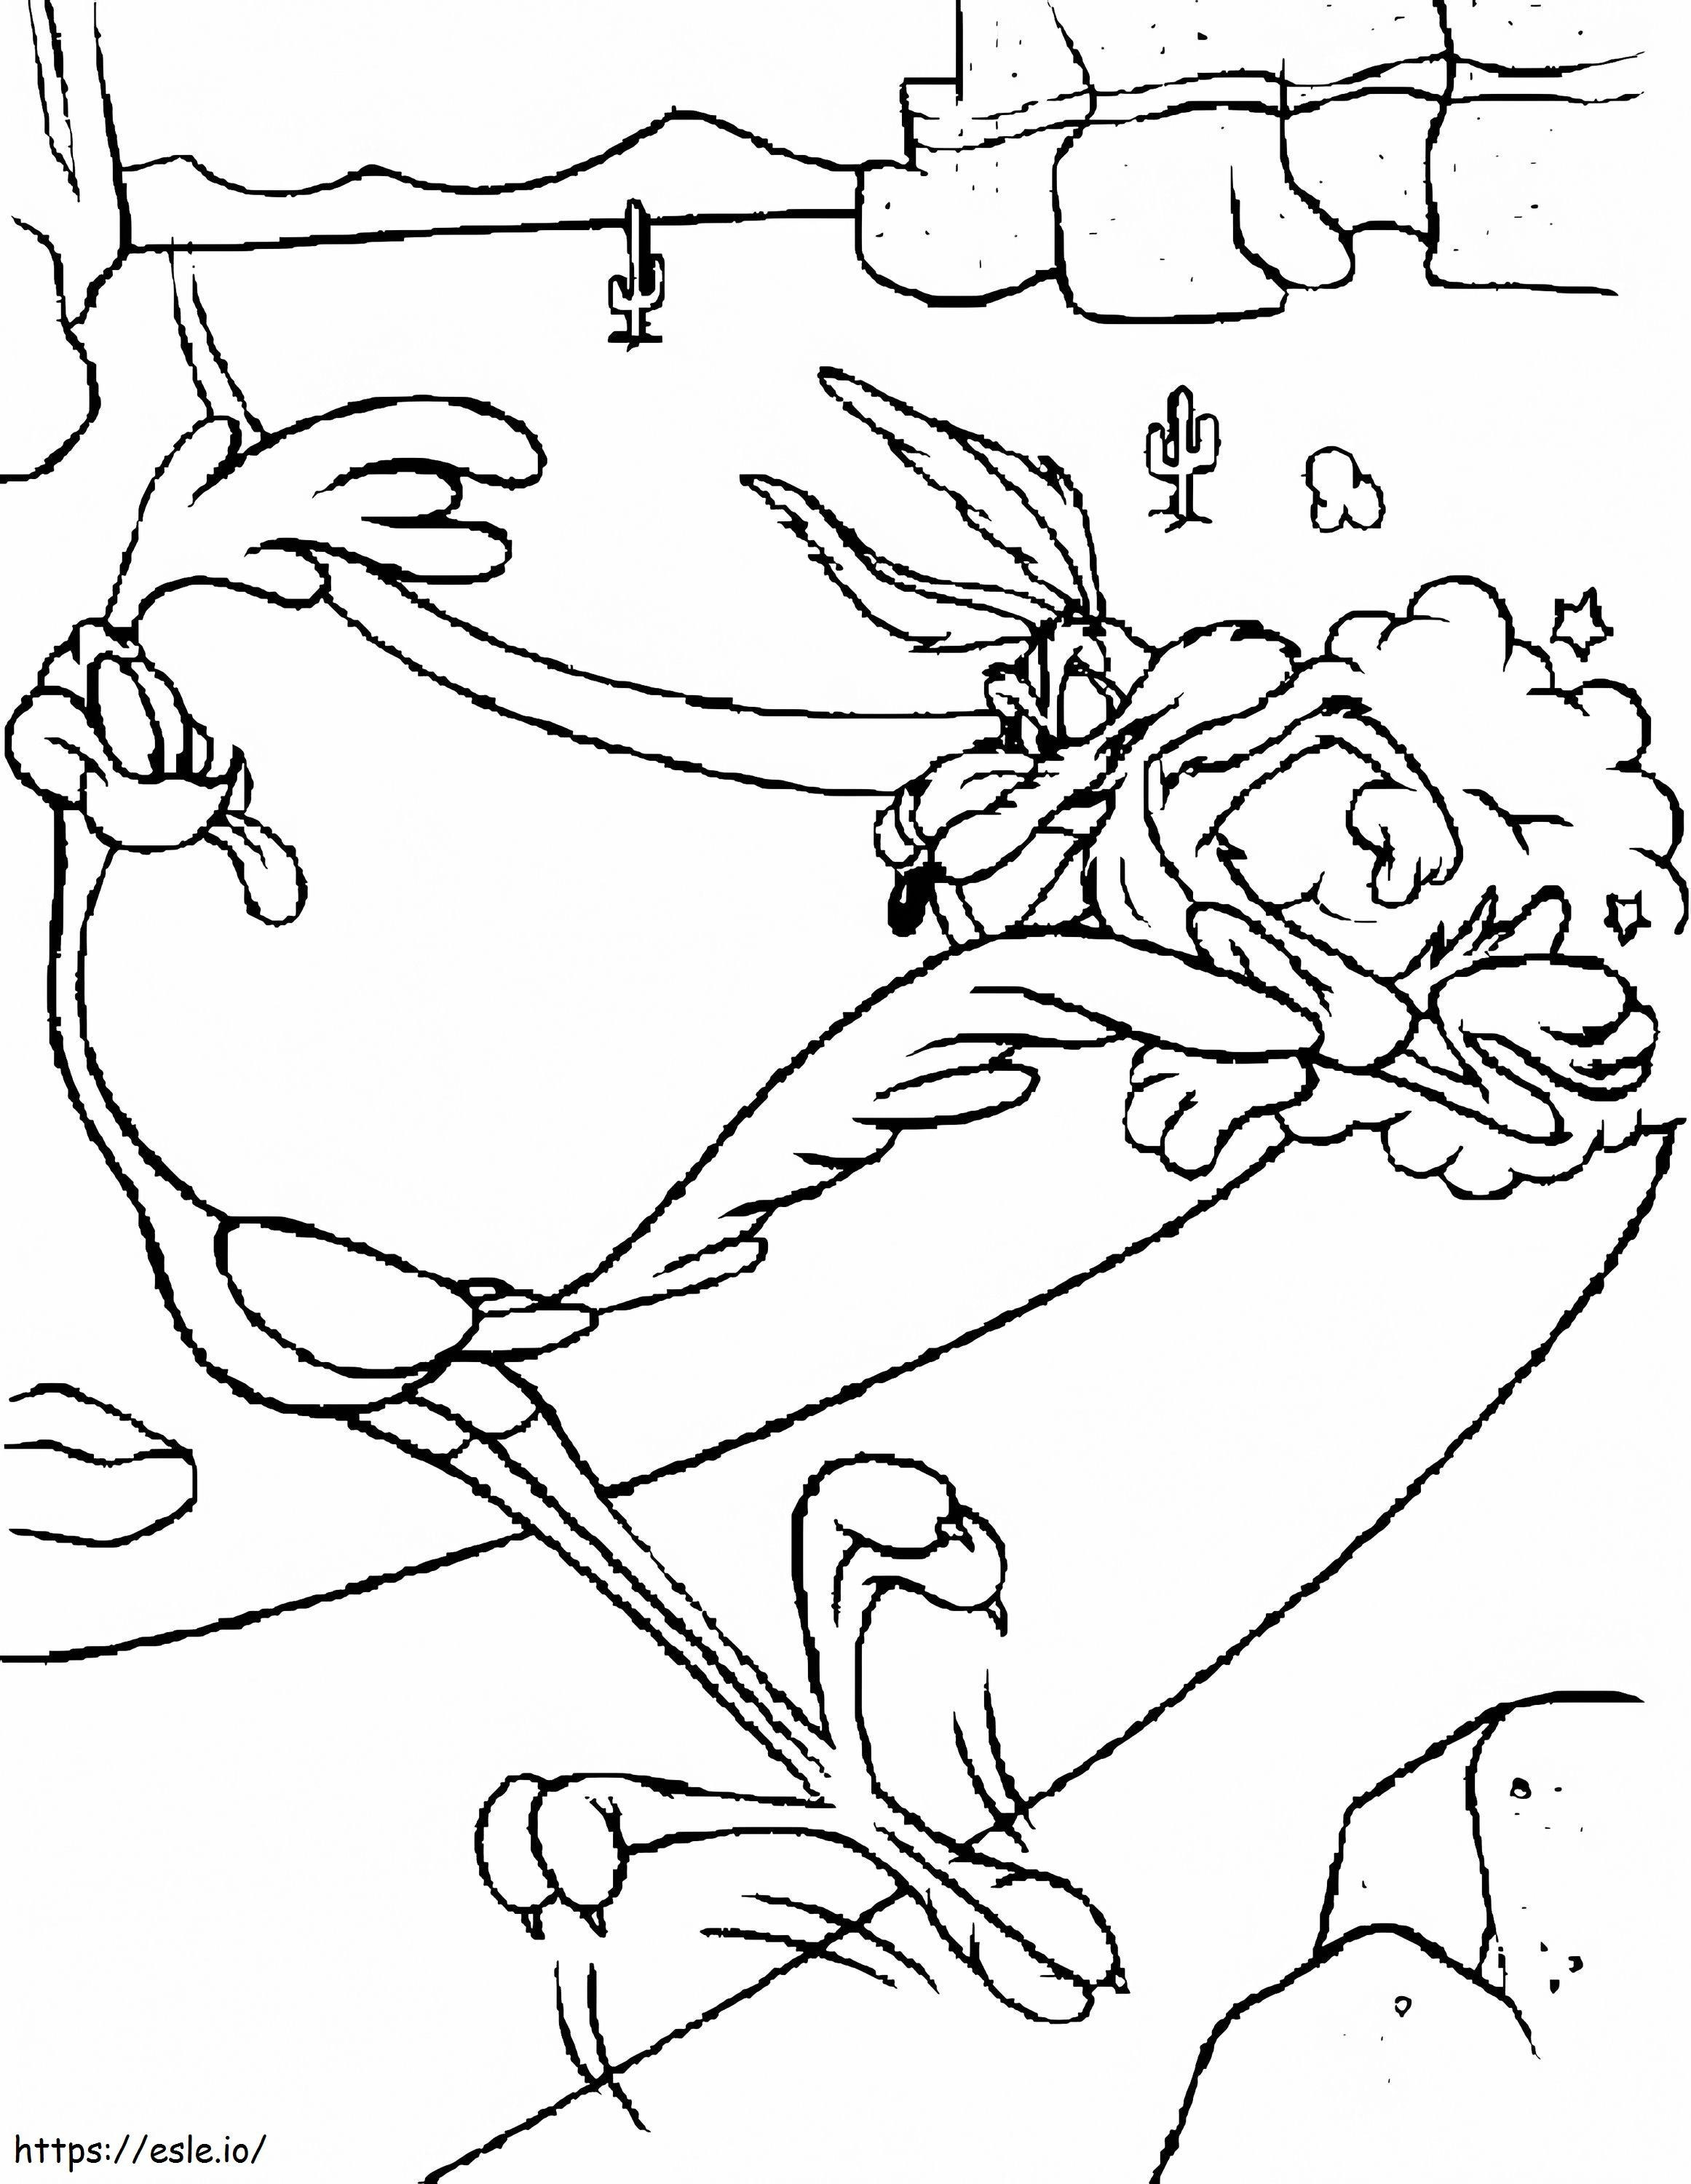 Road Runner 5 coloring page